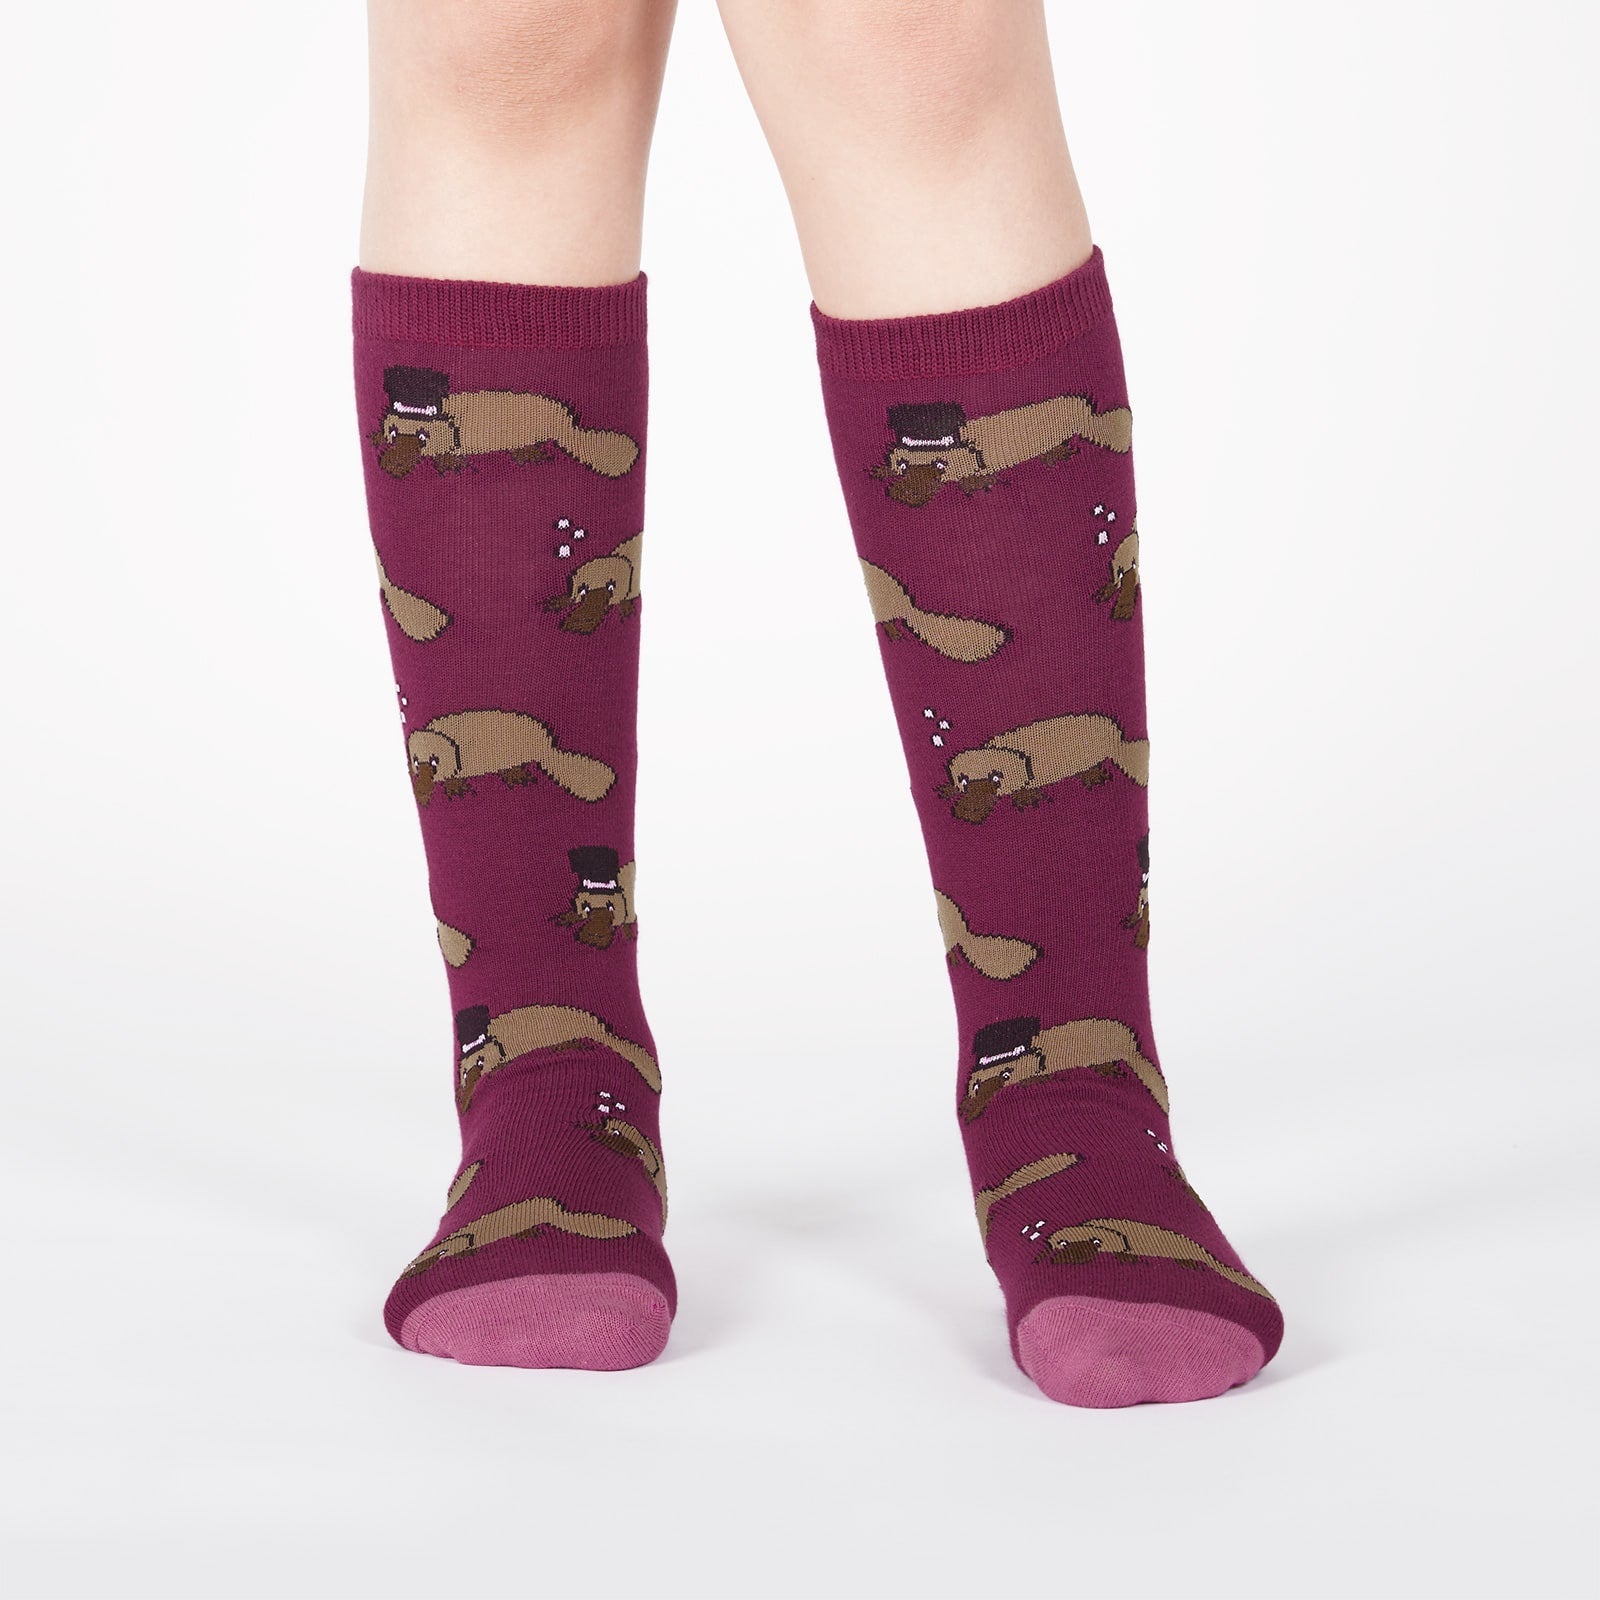 A child wearing purple knee high socks with platypus all over, some wearing top hats - The Sockery